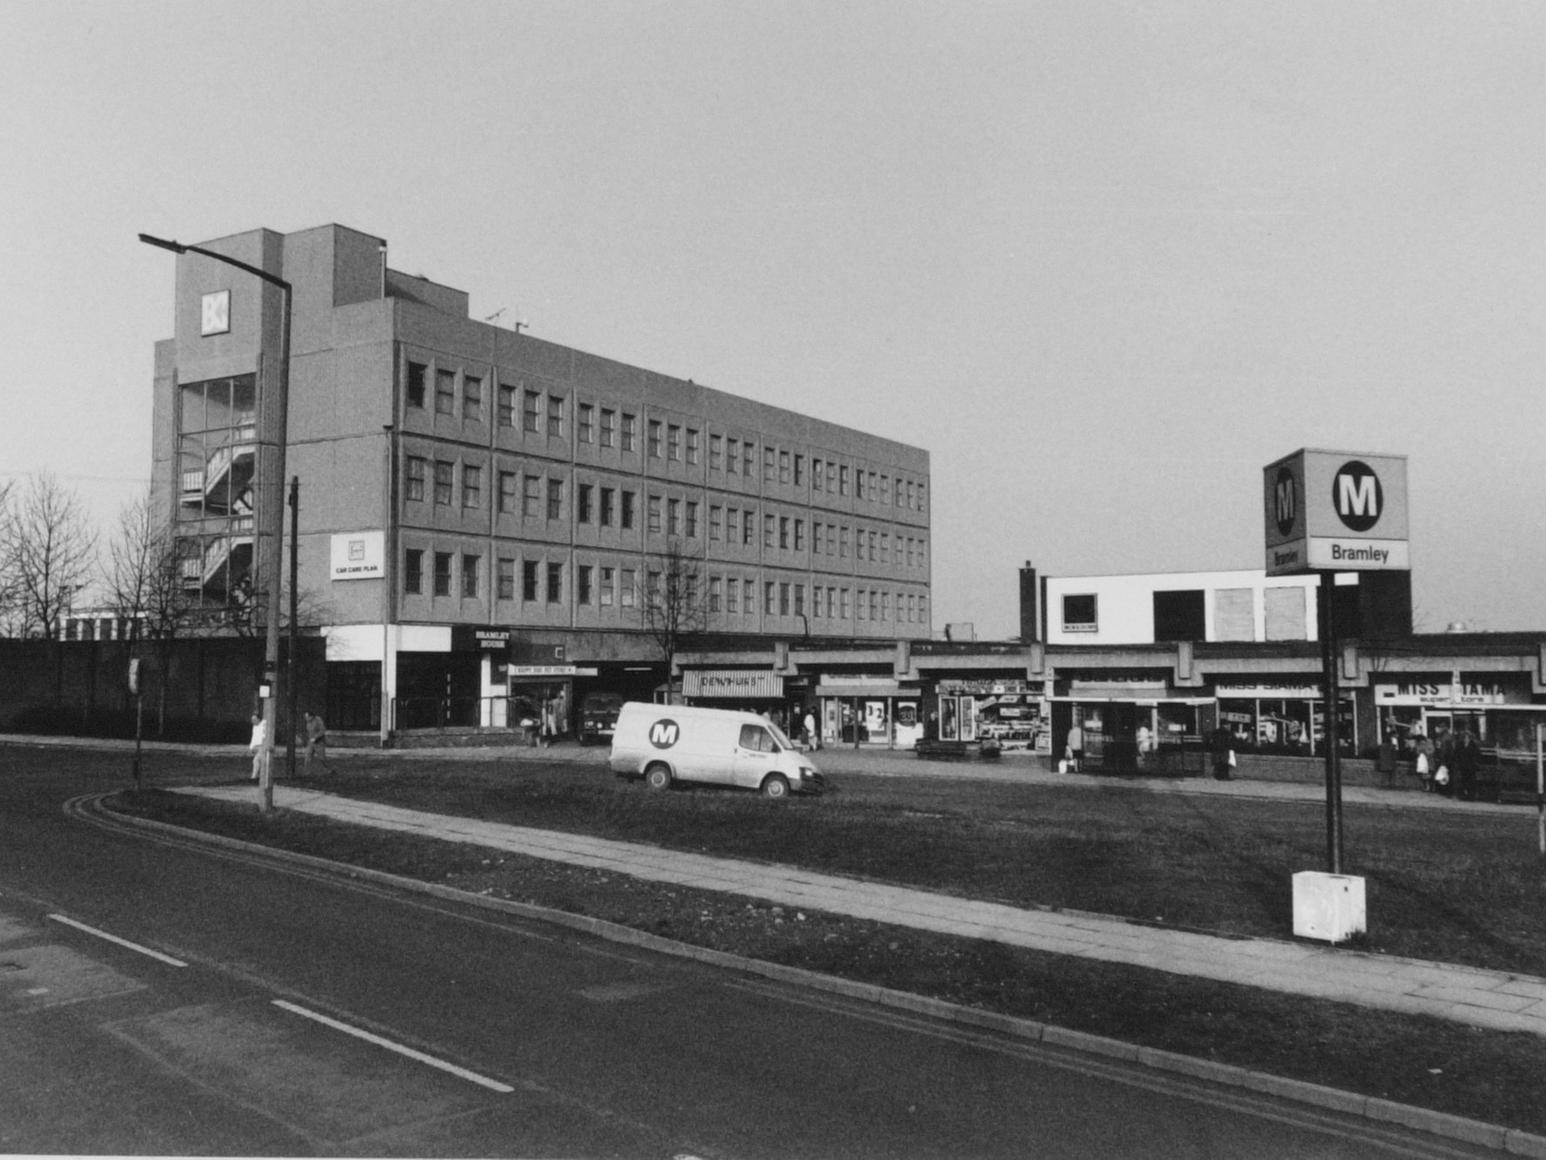 A view of Bramley Shopping Centre in the early 1990s.